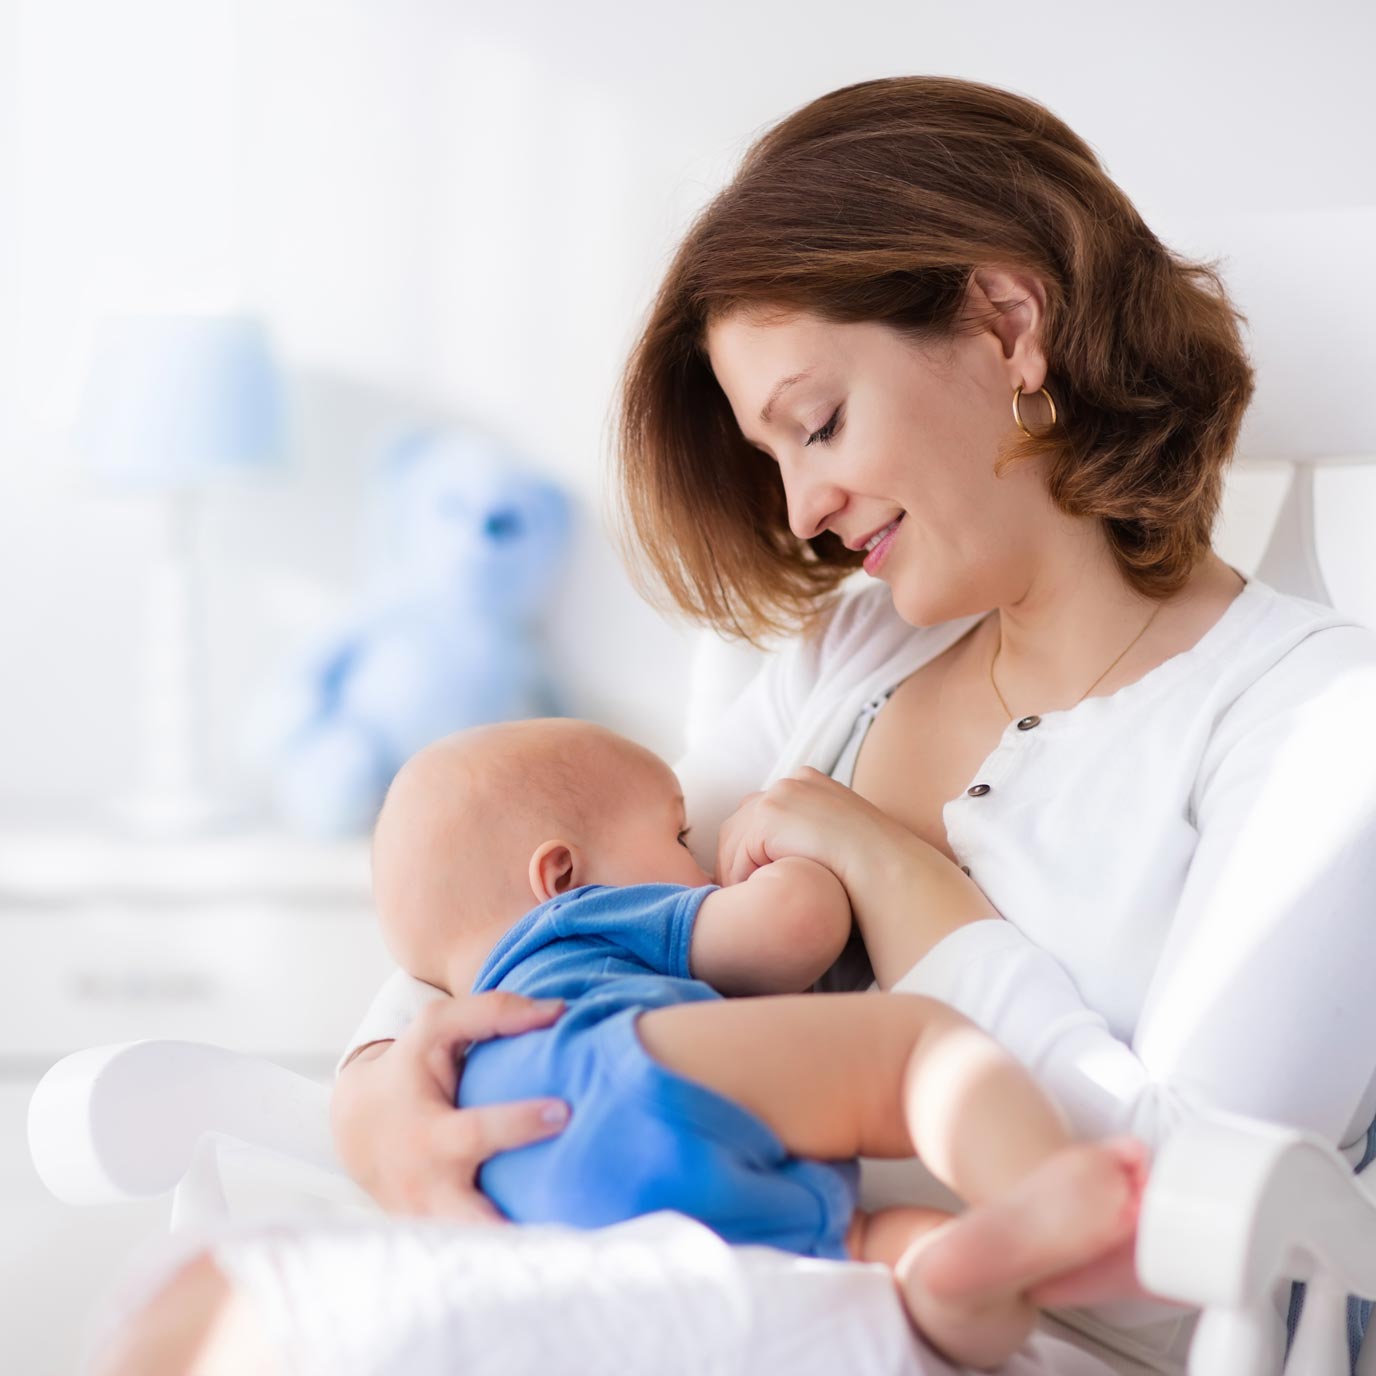 Read about the positive impact of breastfeeding a newborn child on your hormones